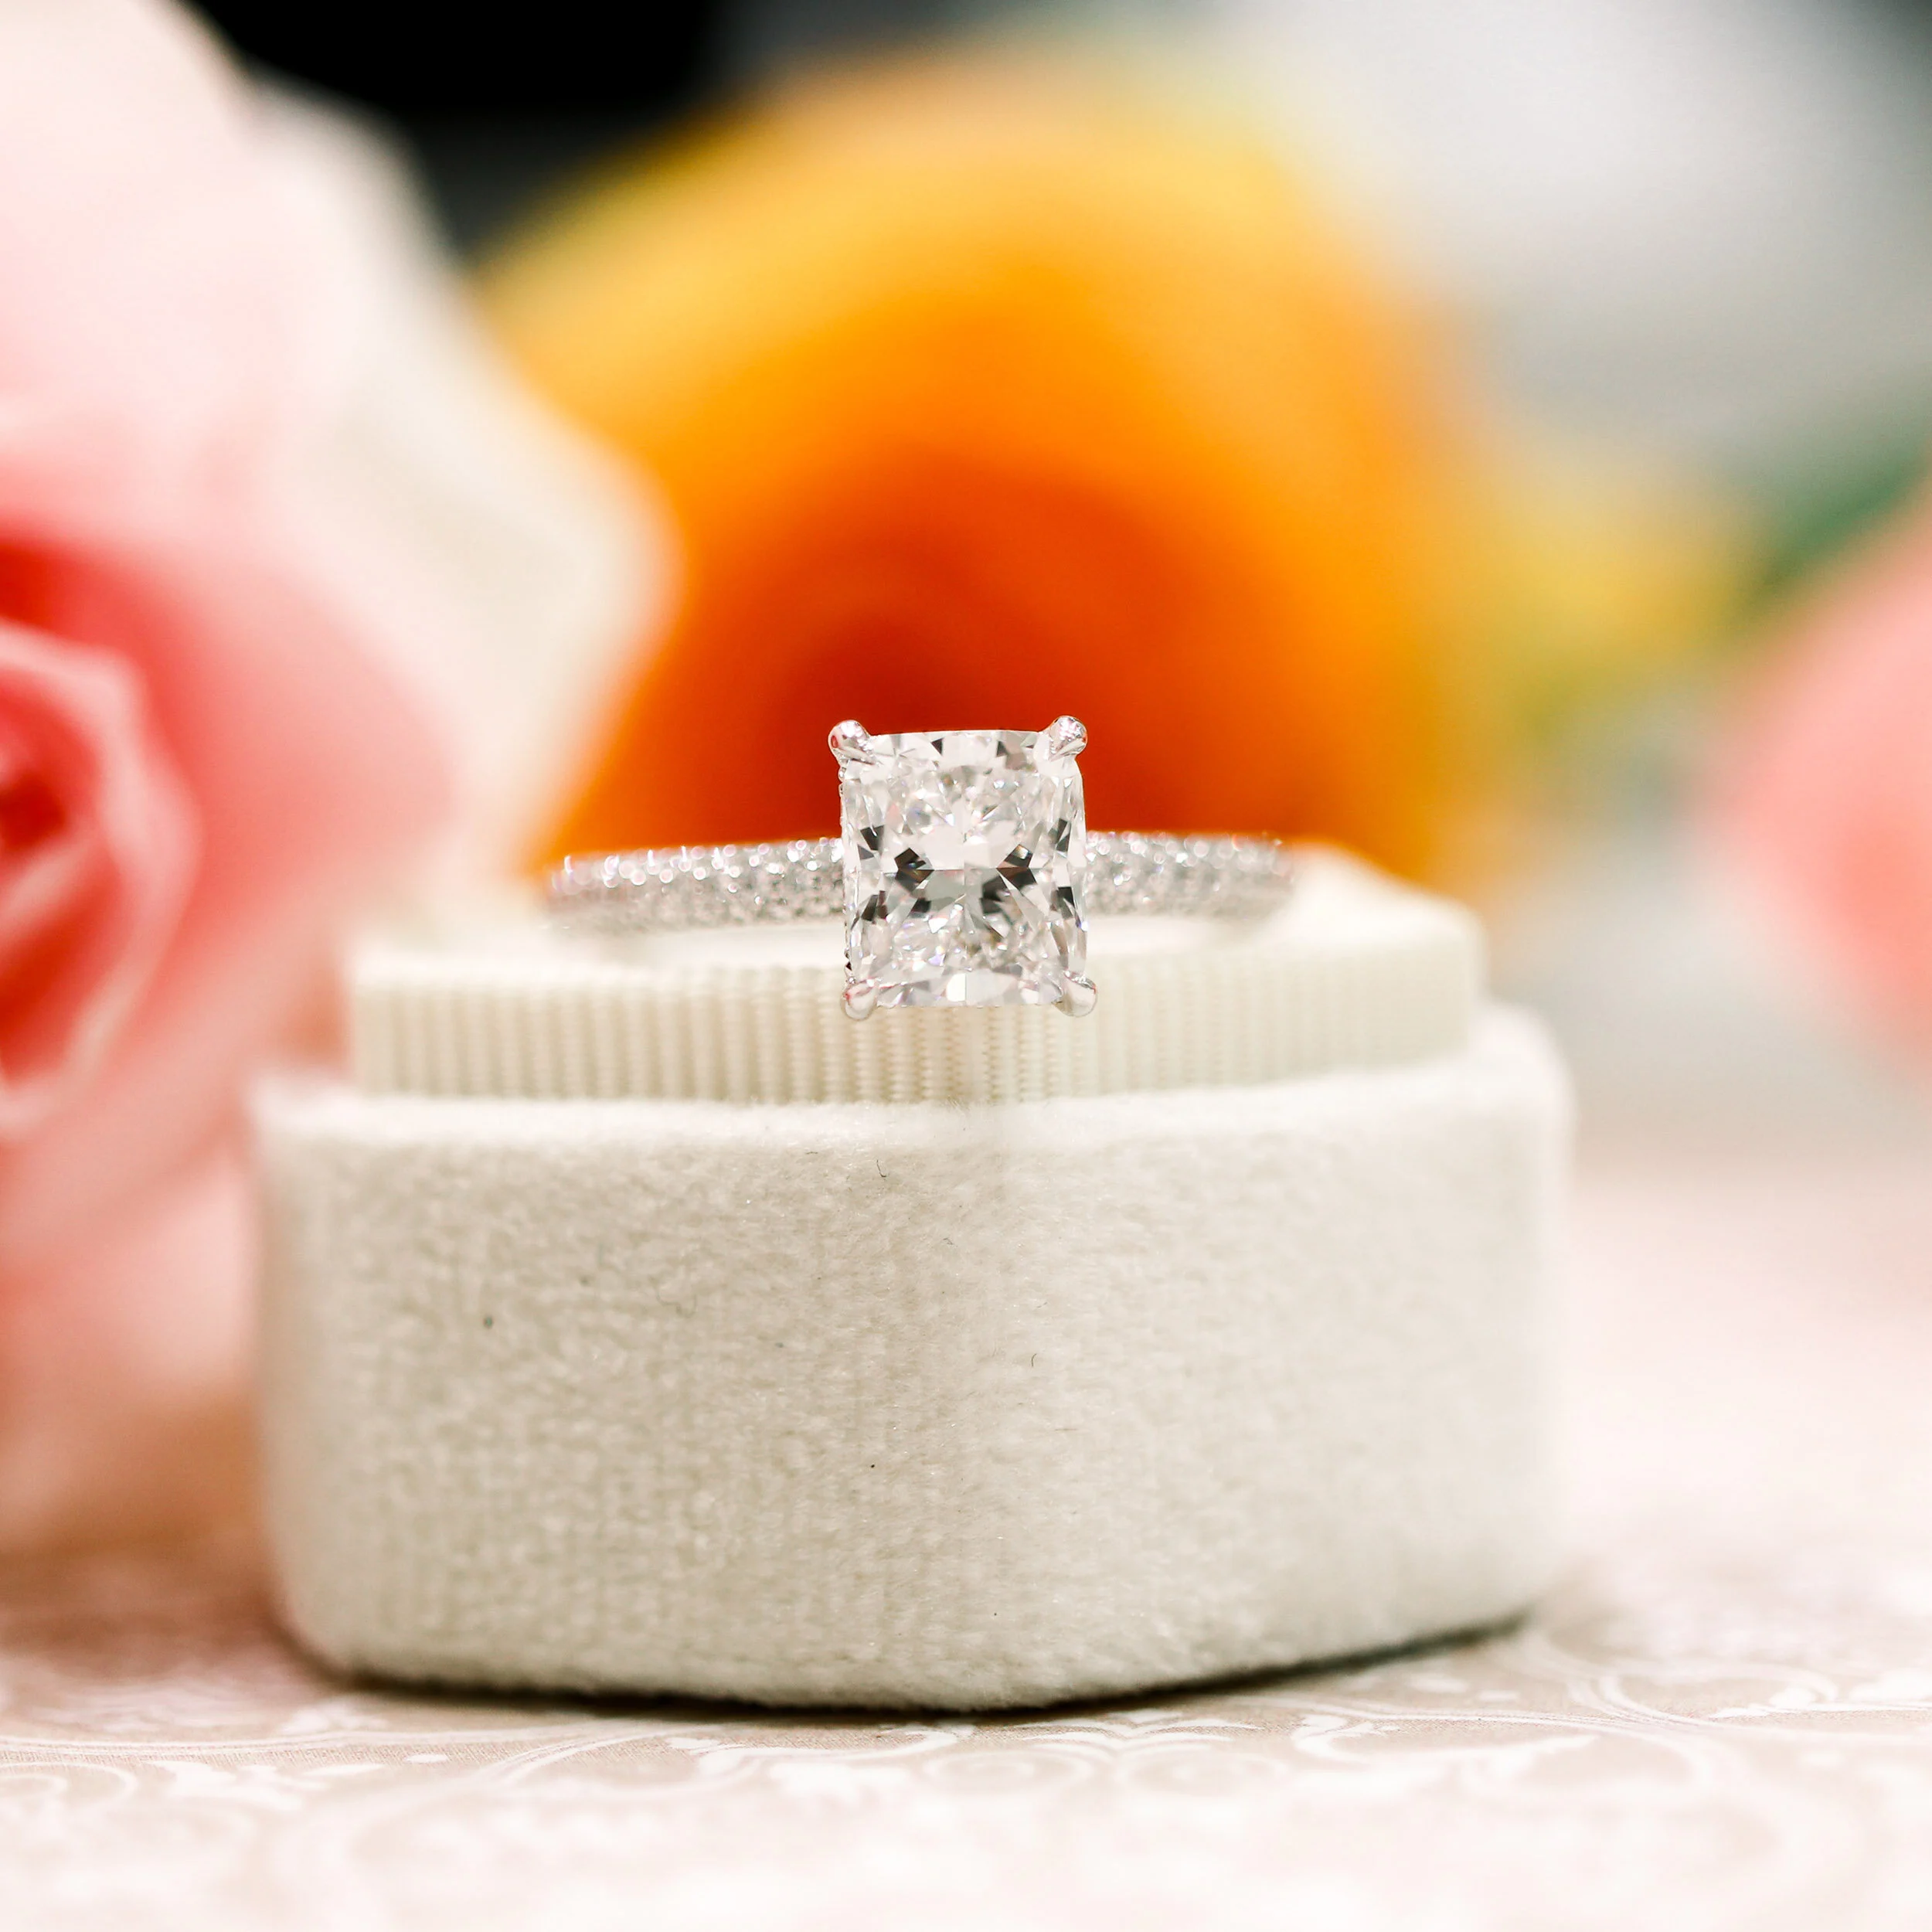 18k White Gold 2.5ct Cushion Cut Three Sided Pavé Engagement Ring with Diamond Basket Made With Lab Diamonds Ada Diamonds Design AD-172 Macro Shot in White Box